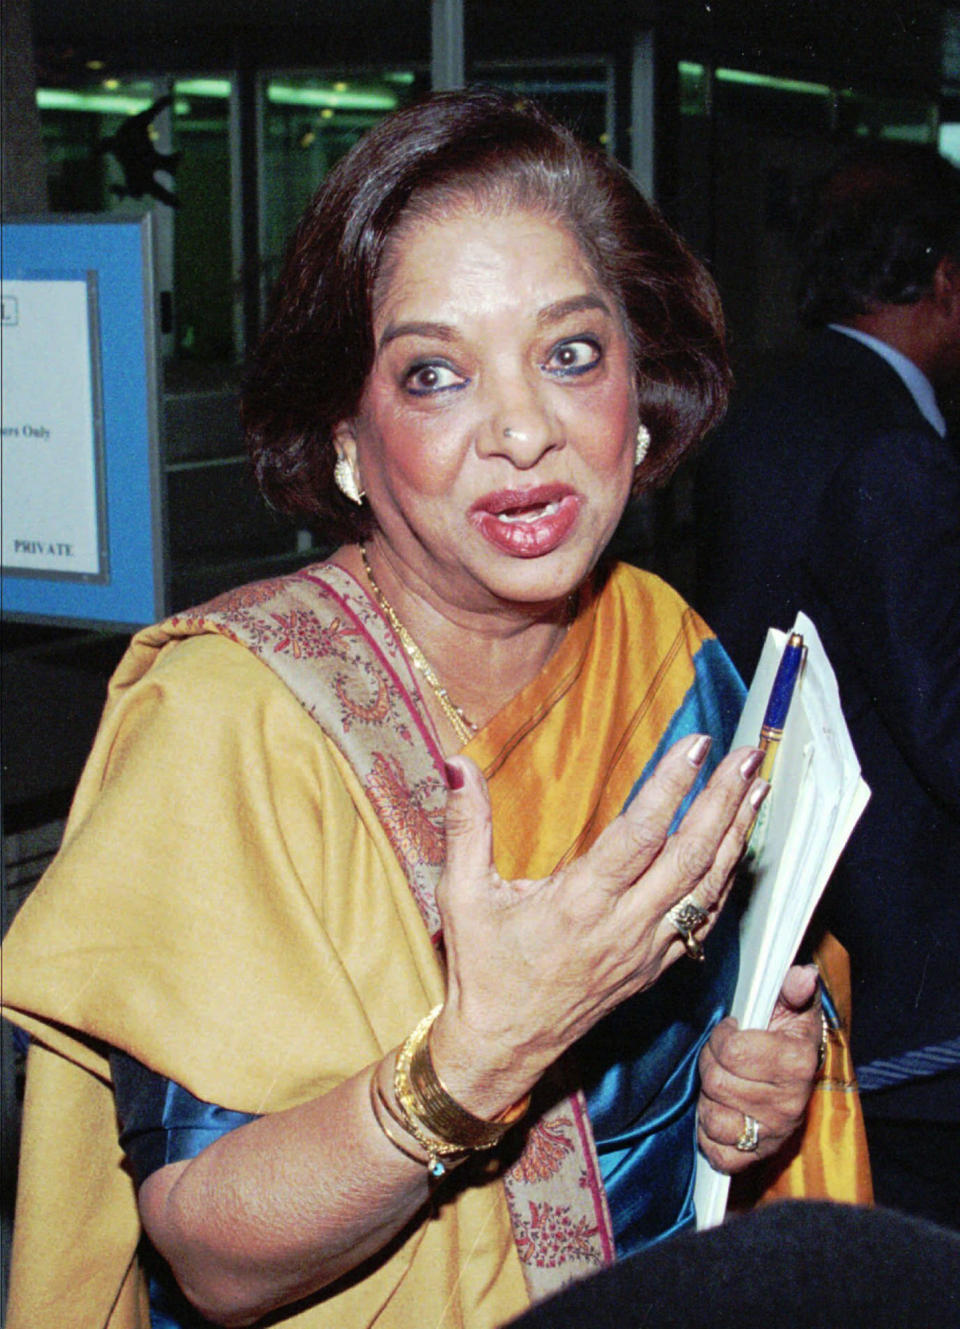 FILE - Nafis Sadik, Pakistani candidate to the post of World Health Organization director general, briefs the media after her presentation at the WHO Executive Board at Geneva, Switzerland, on Jan. 26, 1998. Sadik, a Pakistani doctor who championed women's health and rights and spearheaded the breakthrough action plan adopted by 179 countries at the 1994 U.N. population conference, died four days before her 93rd birthday, her son said late Monday, Aug. 15, 2022. Omar Sadik said his mother died of natural causes at her home in New York on Sunday night. (AP Photo/Donald Stampfli, File)